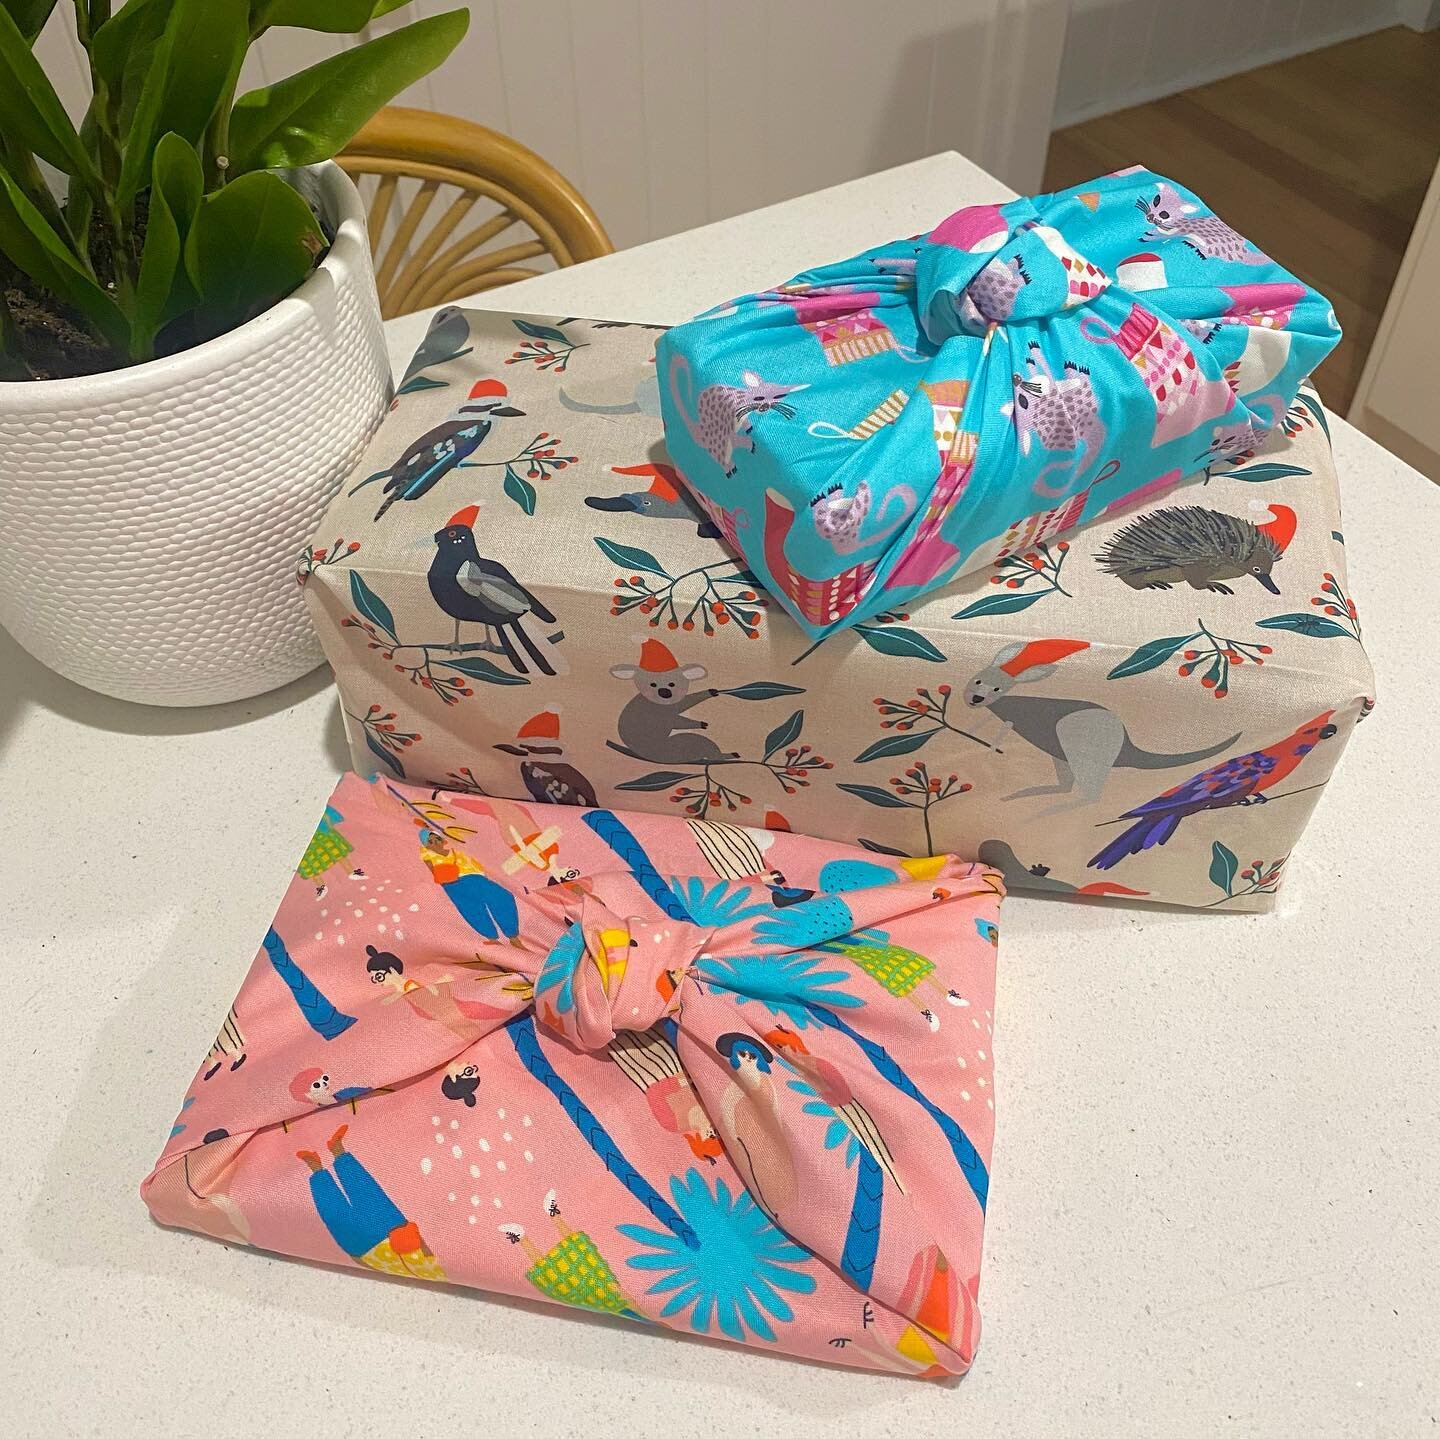 I&rsquo;ll be making more fabric gift wraps this year so send me a message if you are interested!

I can do a range of sizes and patterns to suit all gift types. These can be re-used year after year which is the best part!

Either send me a message o